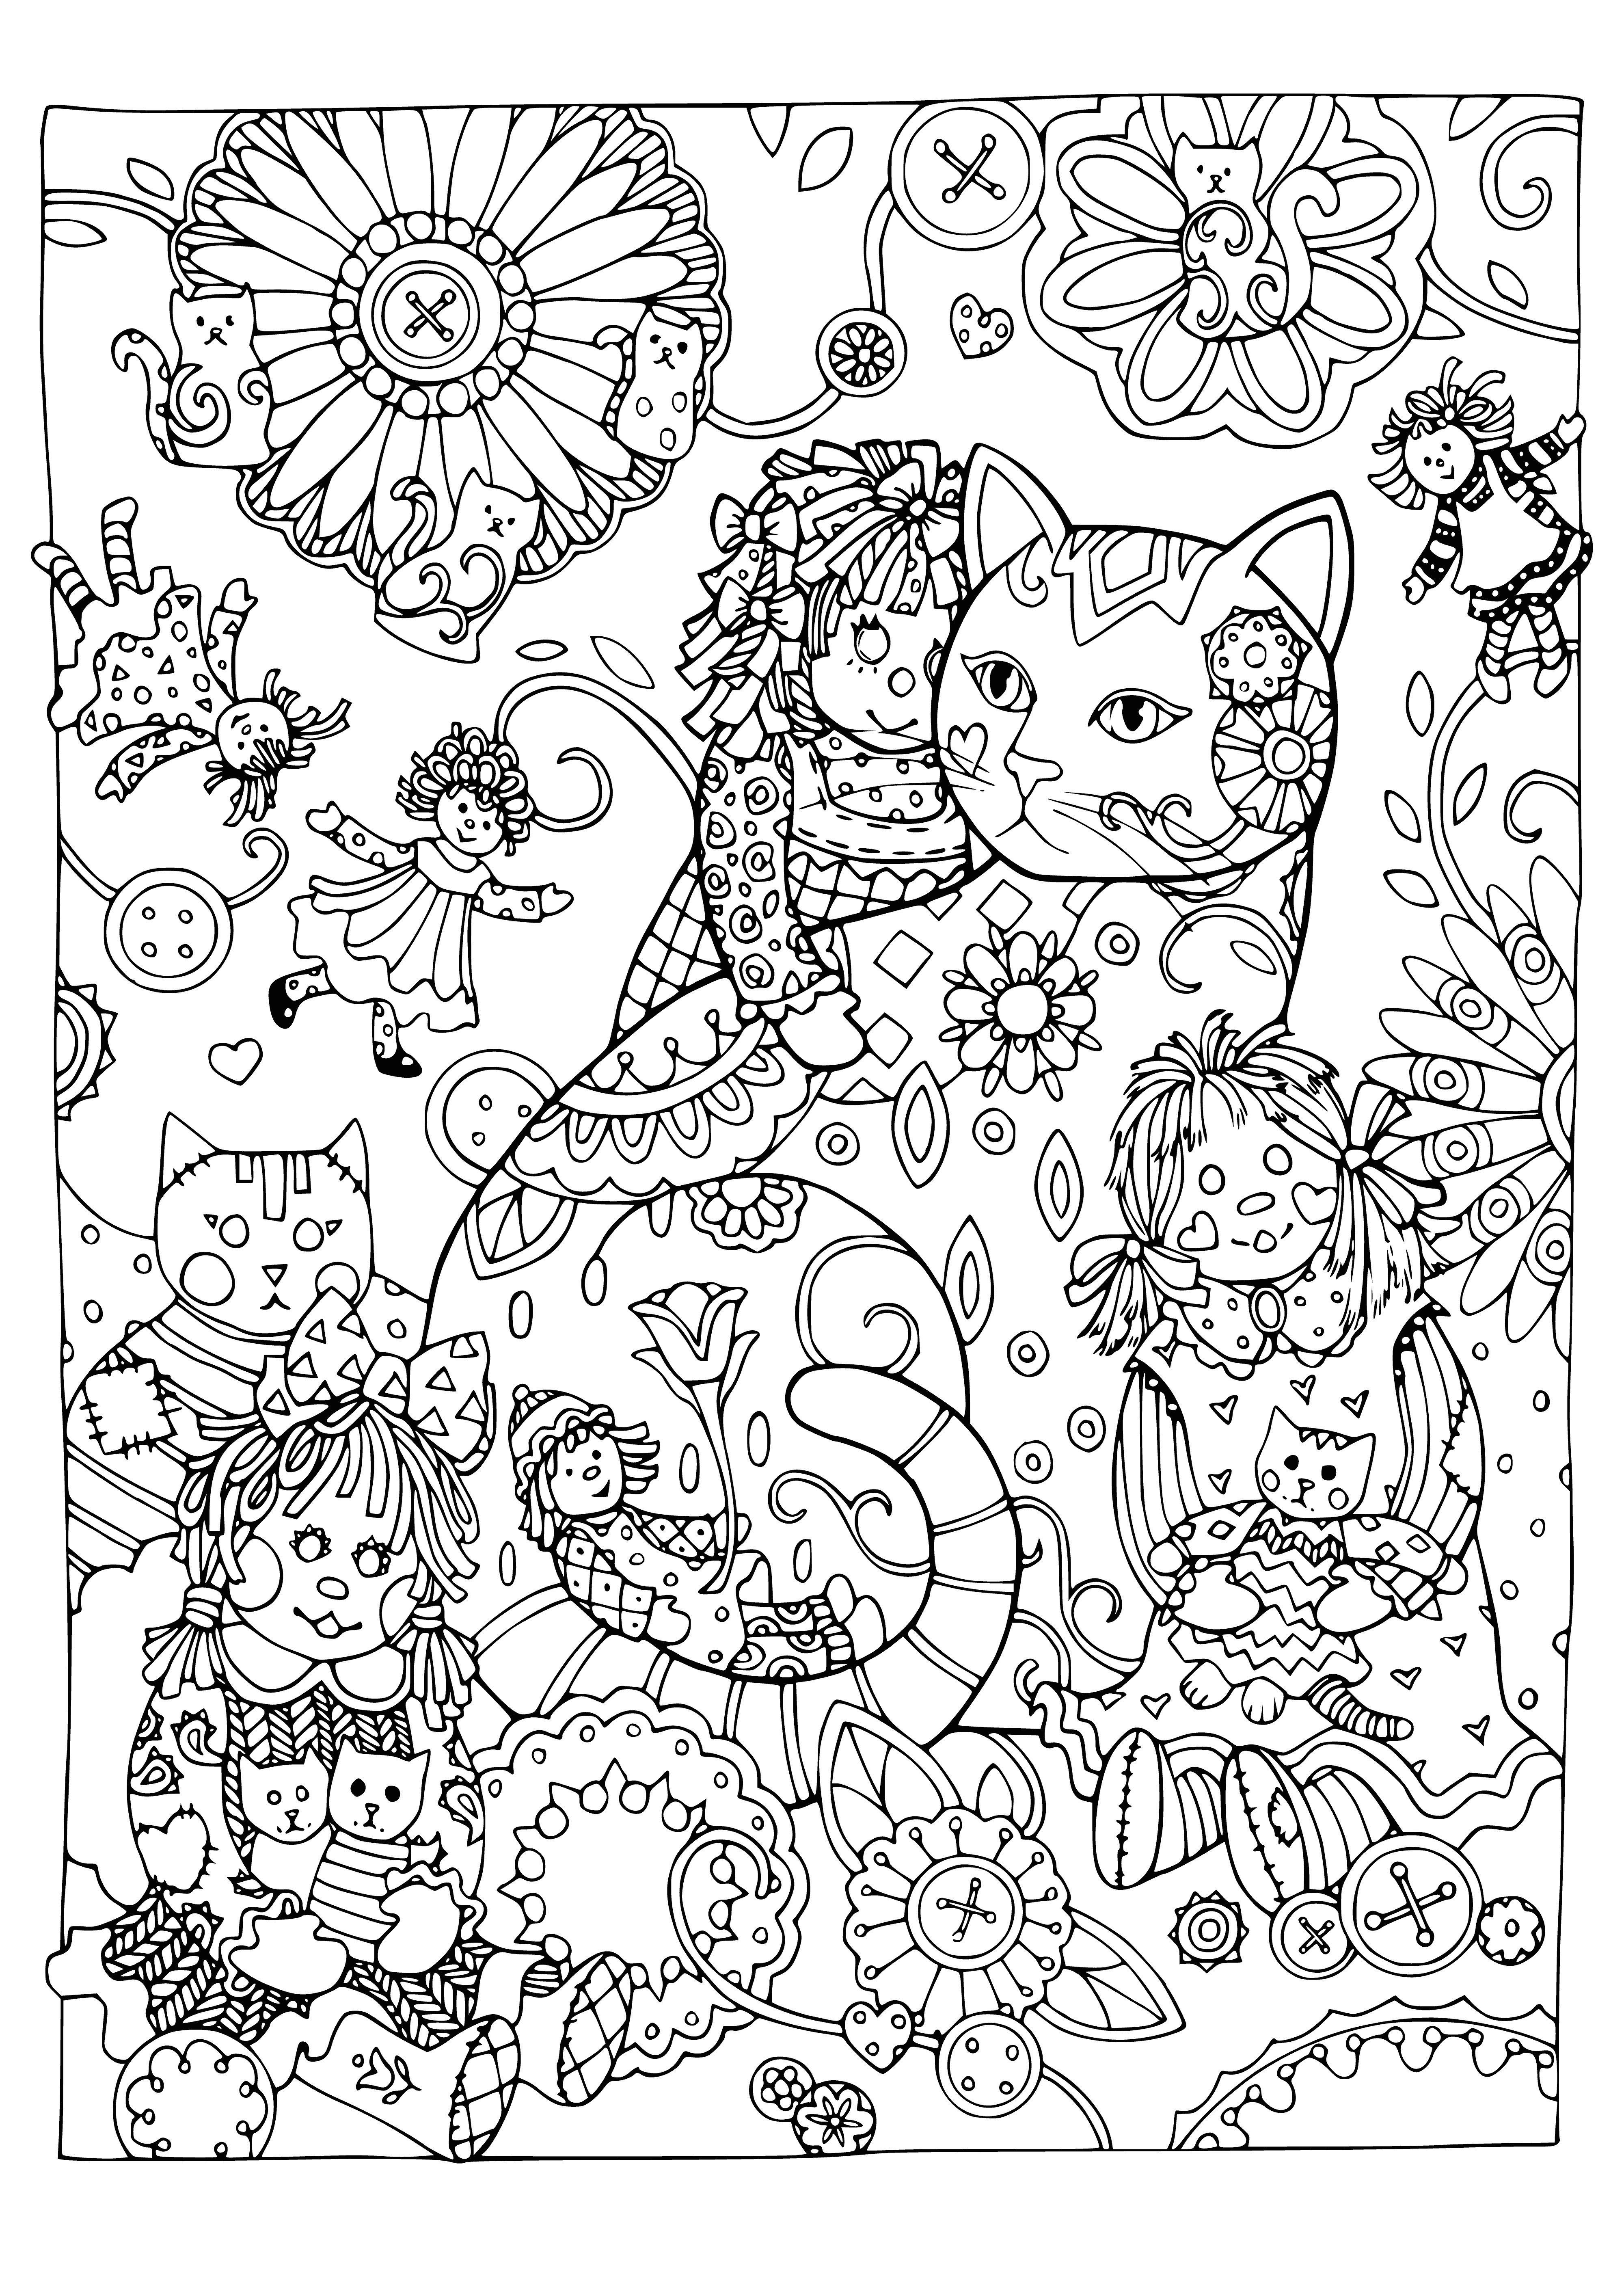 coloring page: Cat relaxes amongst dolls, some cross and some content, while it is in a deep state of relaxation with eyes closed. #catlife #dollcollector